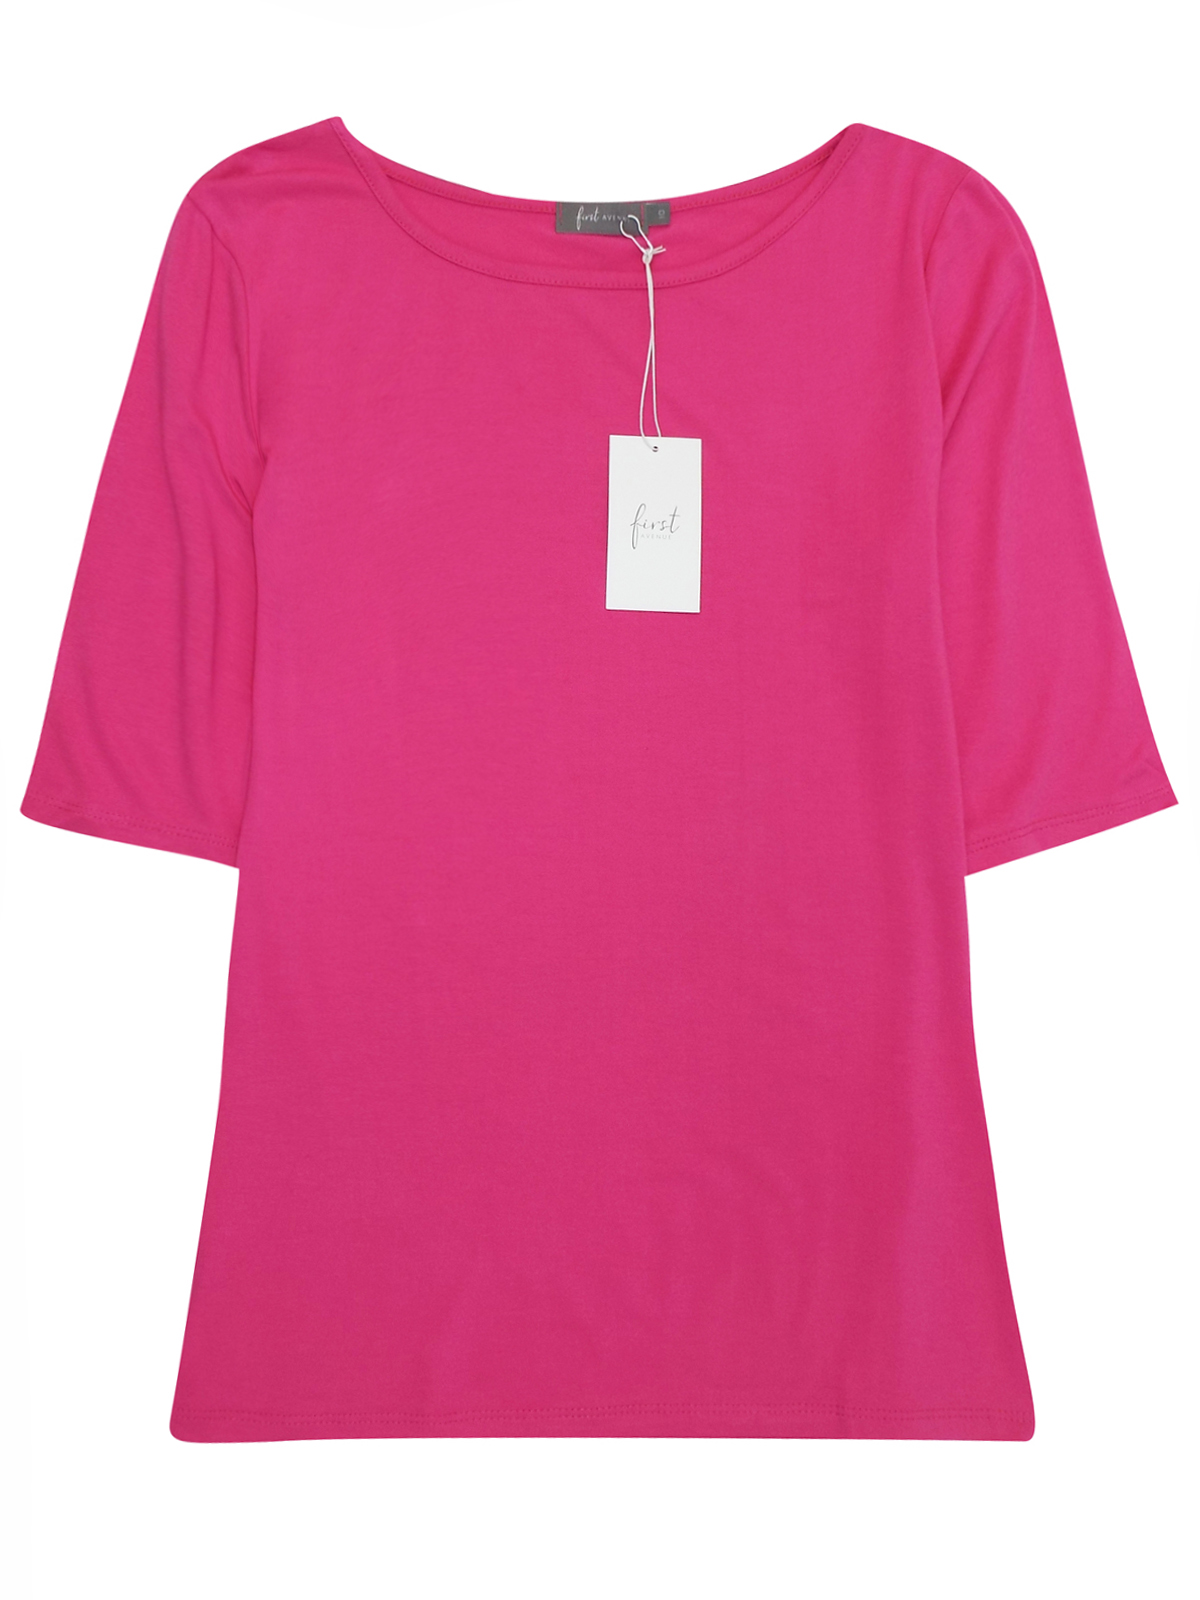 First Avenue PINK Half Sleeve Jersey Top - Size 10 to 20